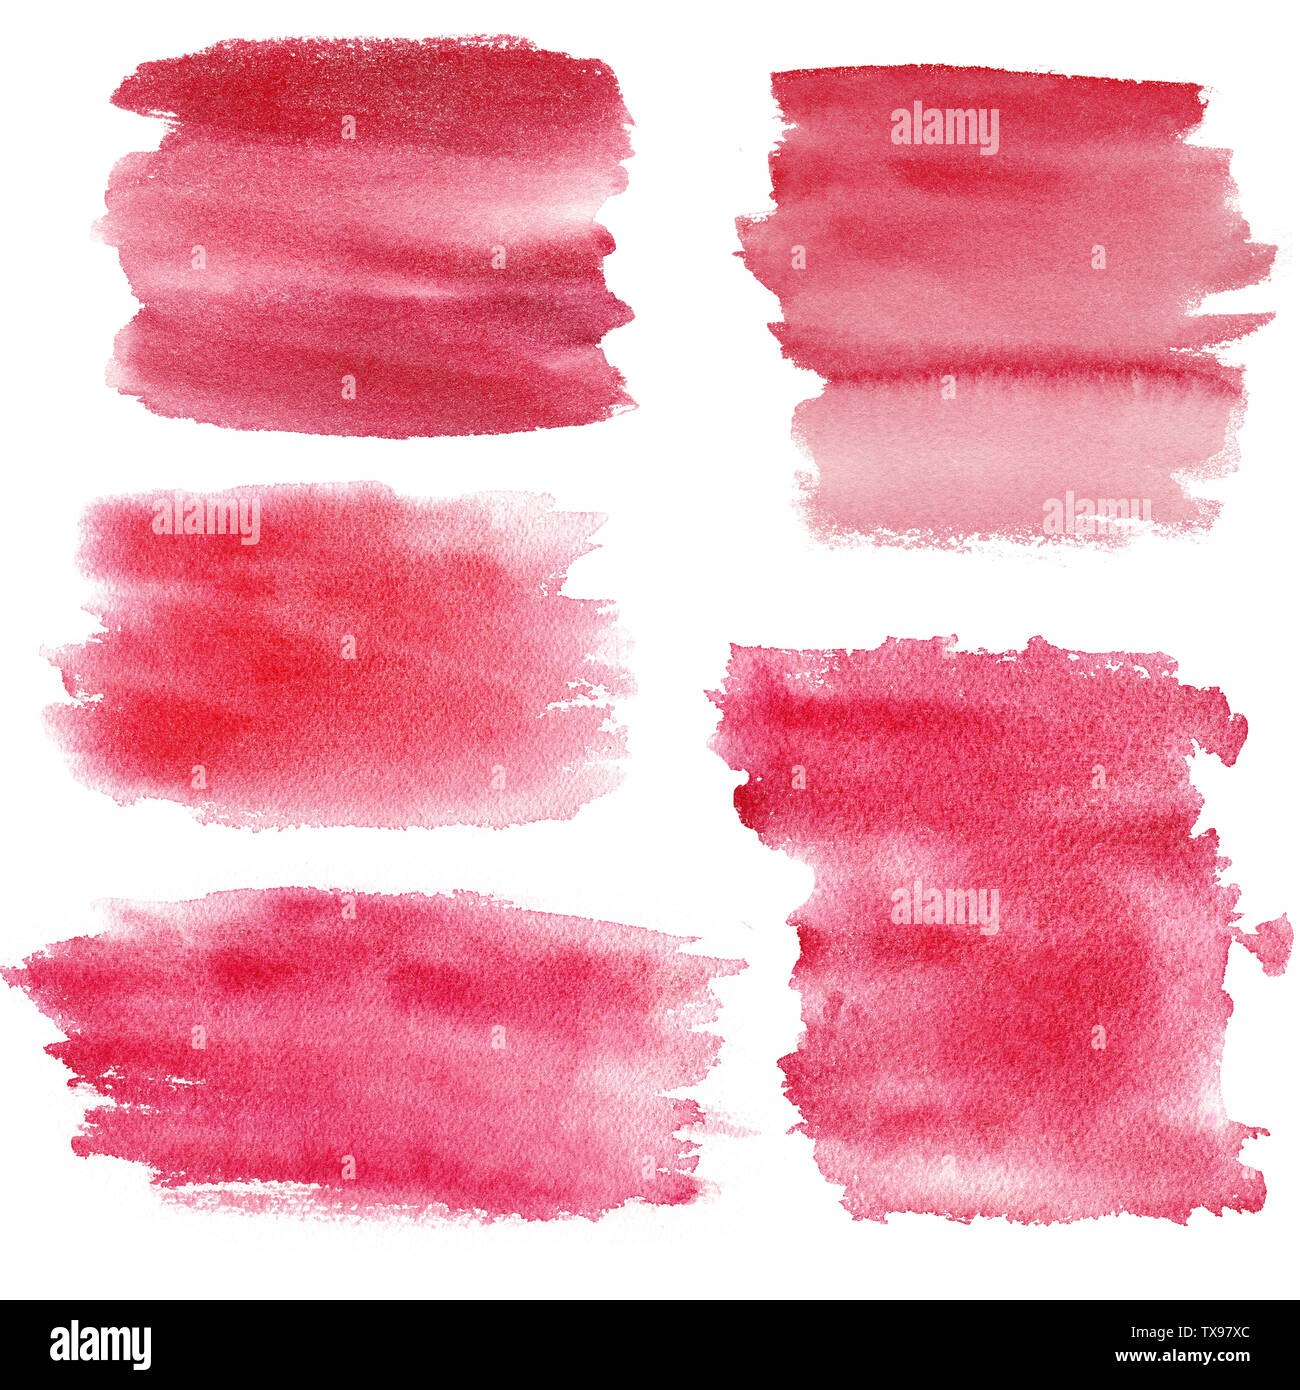 Watercolor red paint brushtrokes raster texture set. Watercolour crimson hand drawn brush strokes stain. Gradient ombre water drawing background. Aqua Stock Photo